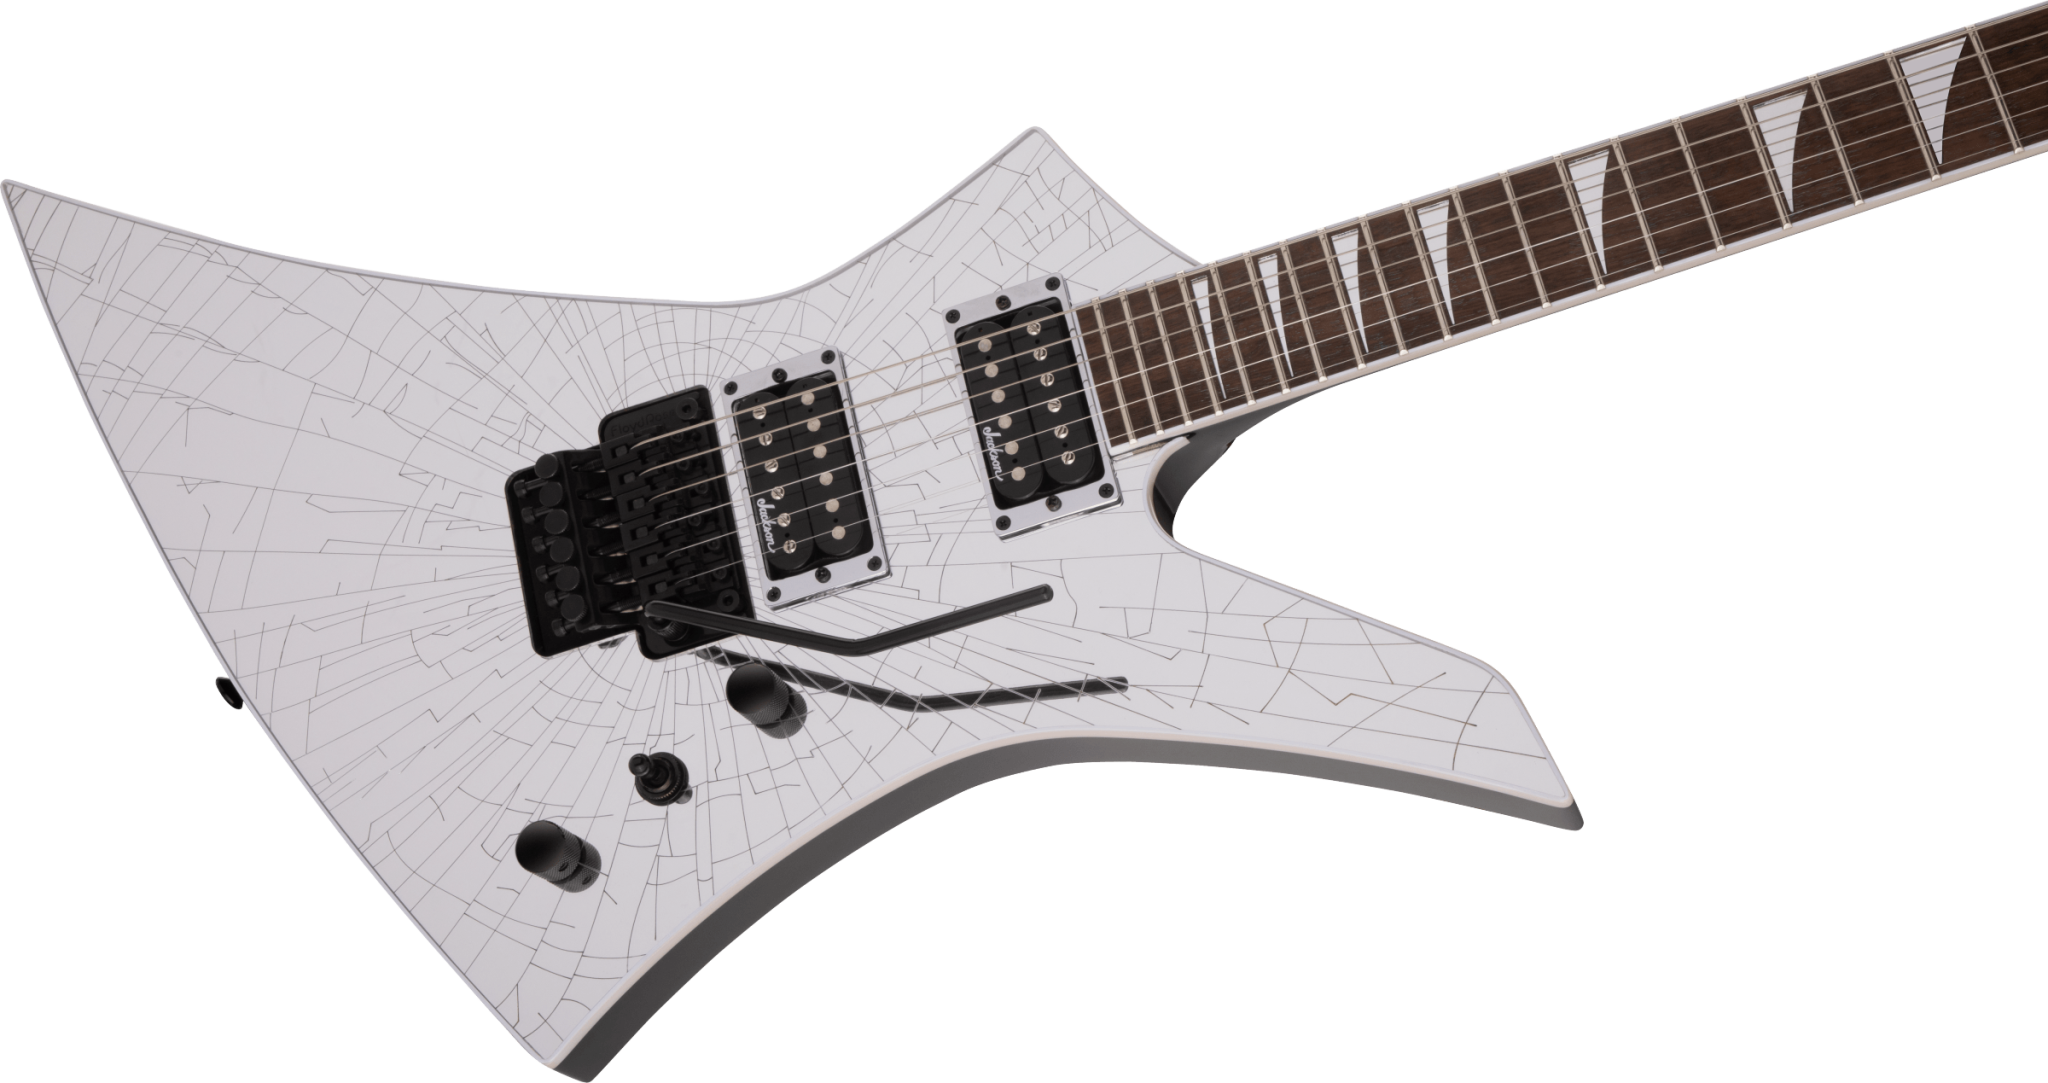 Jackson X Series KEXQ Kelly with Laurel Fretboard